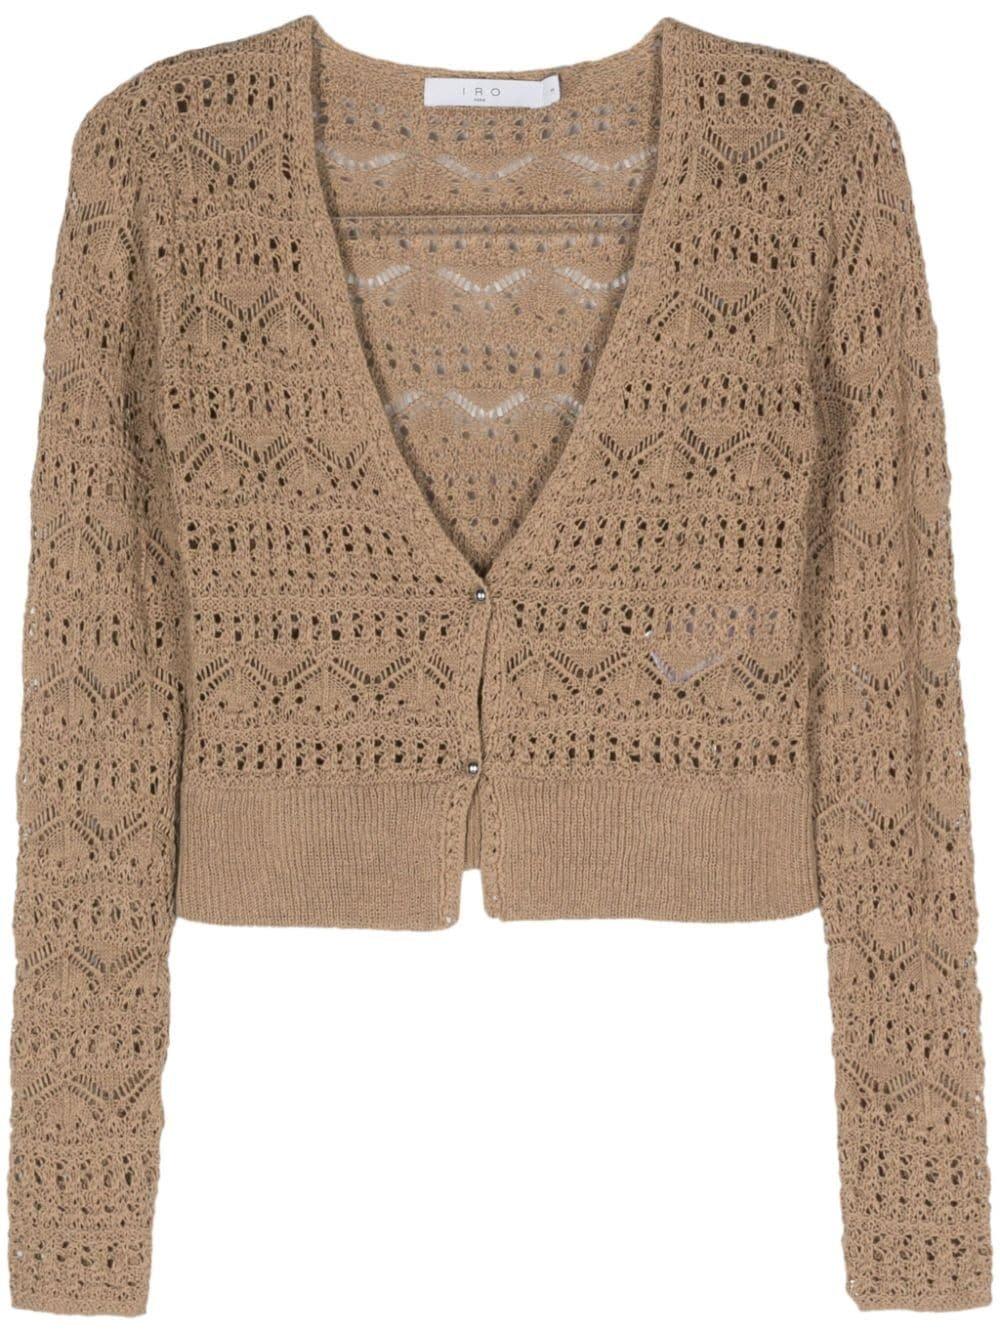 Knitted Button-up Cardigan